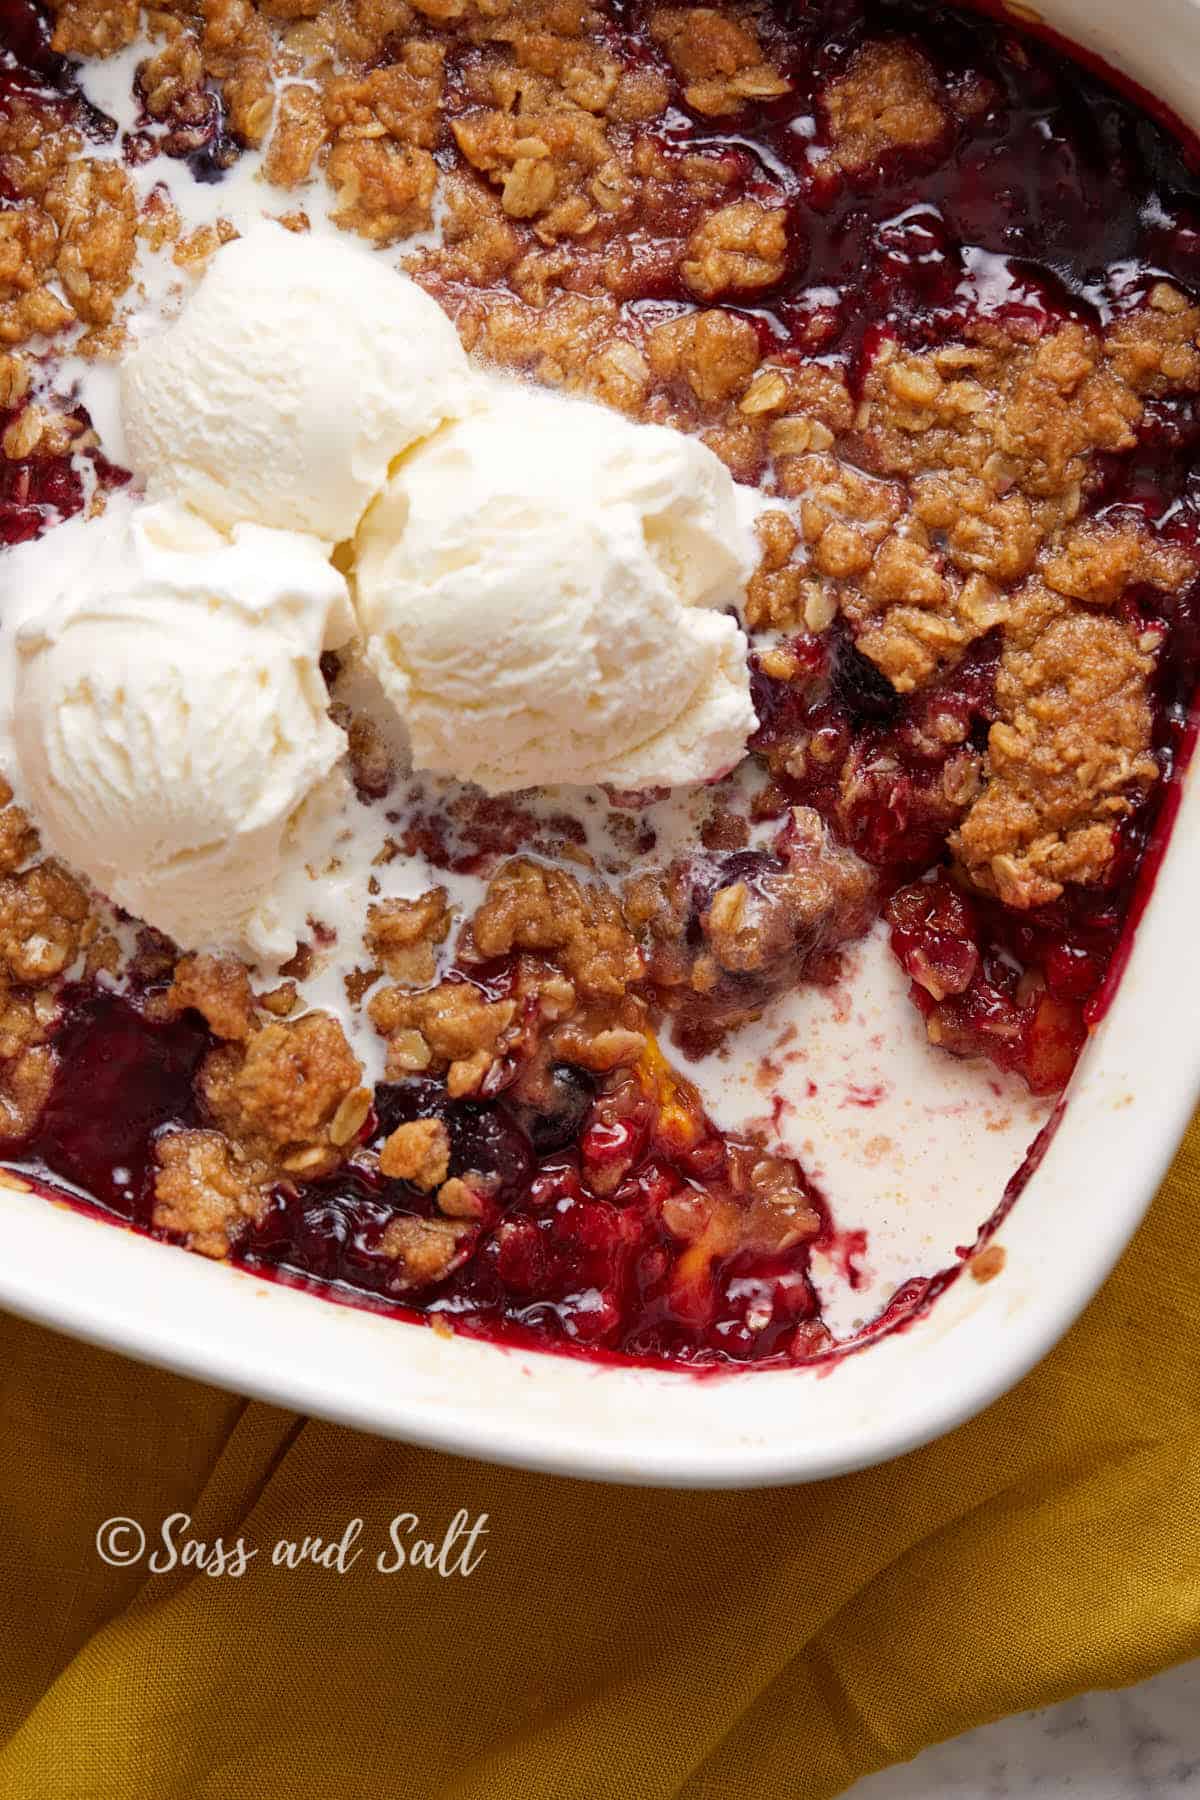 A freshly baked berry crumble topped with three scoops of vanilla ice cream, served in a white baking dish with vibrant red berry filling oozing from the sides.